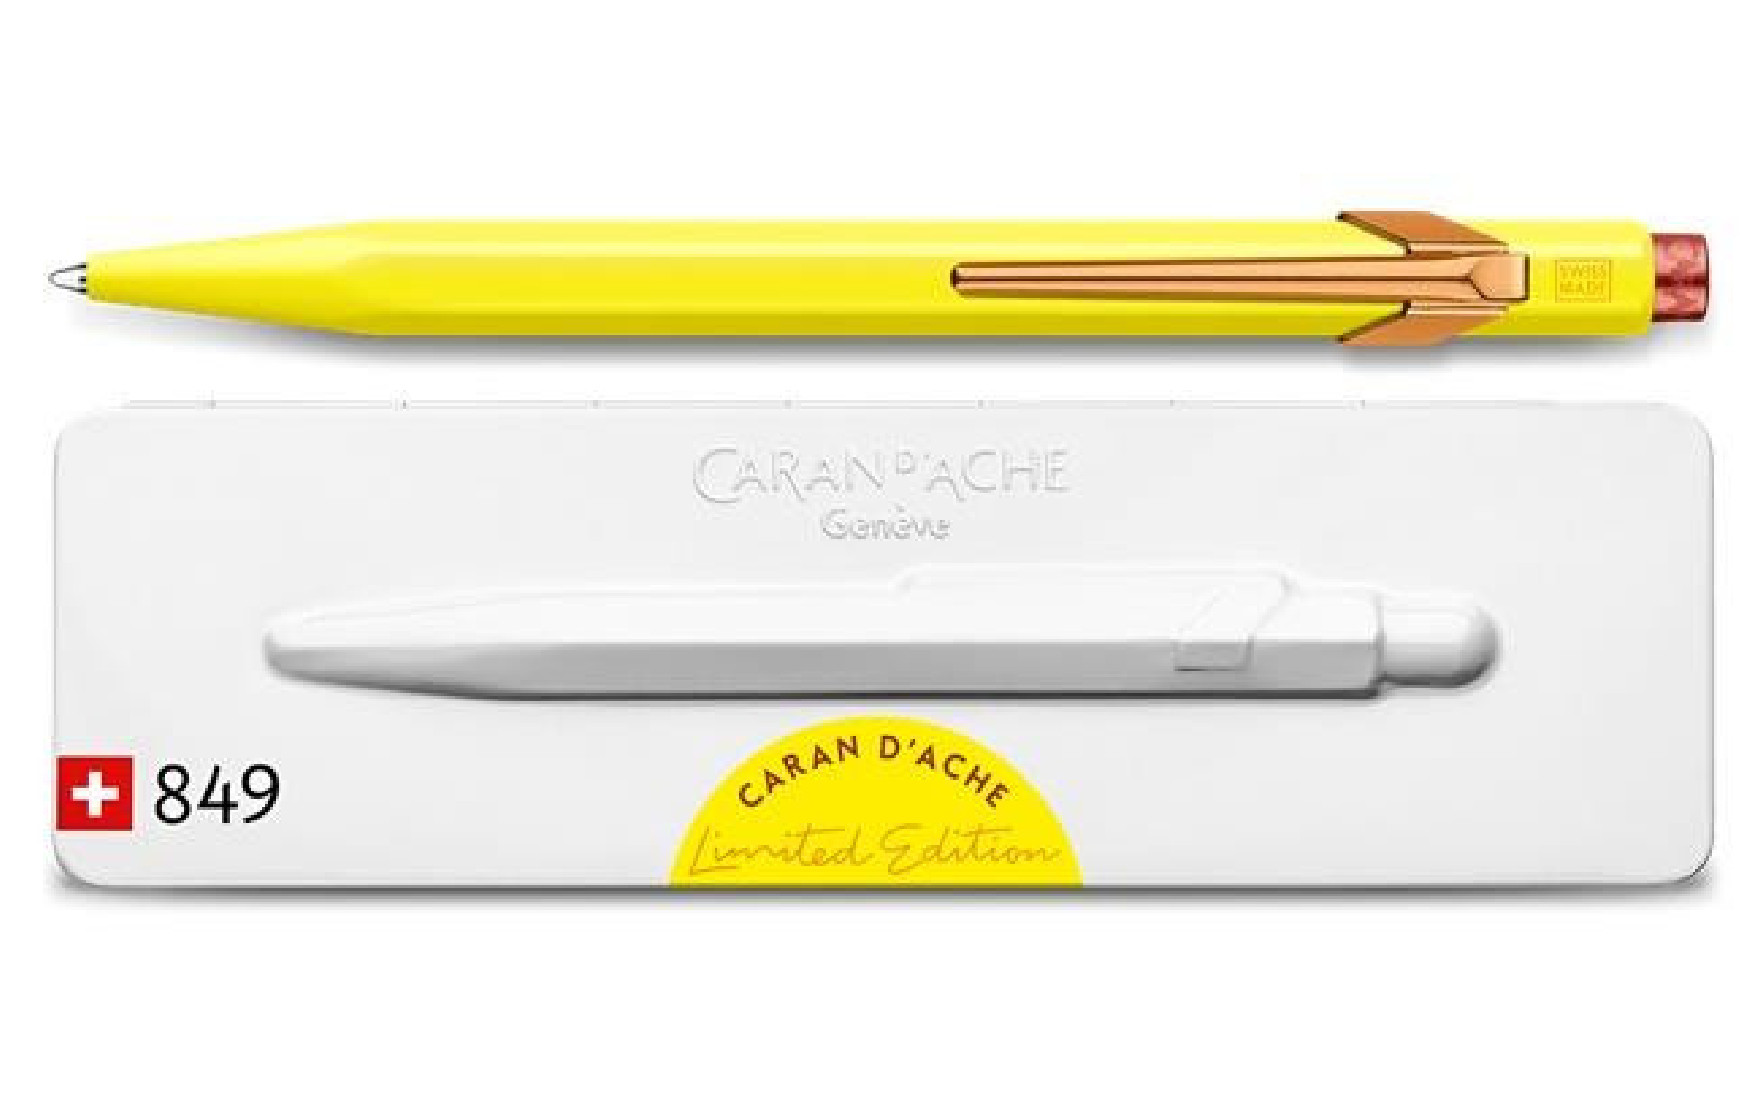 Caran dache Ballpoint Pen 849 claim your style canary yellow – Limited Edition